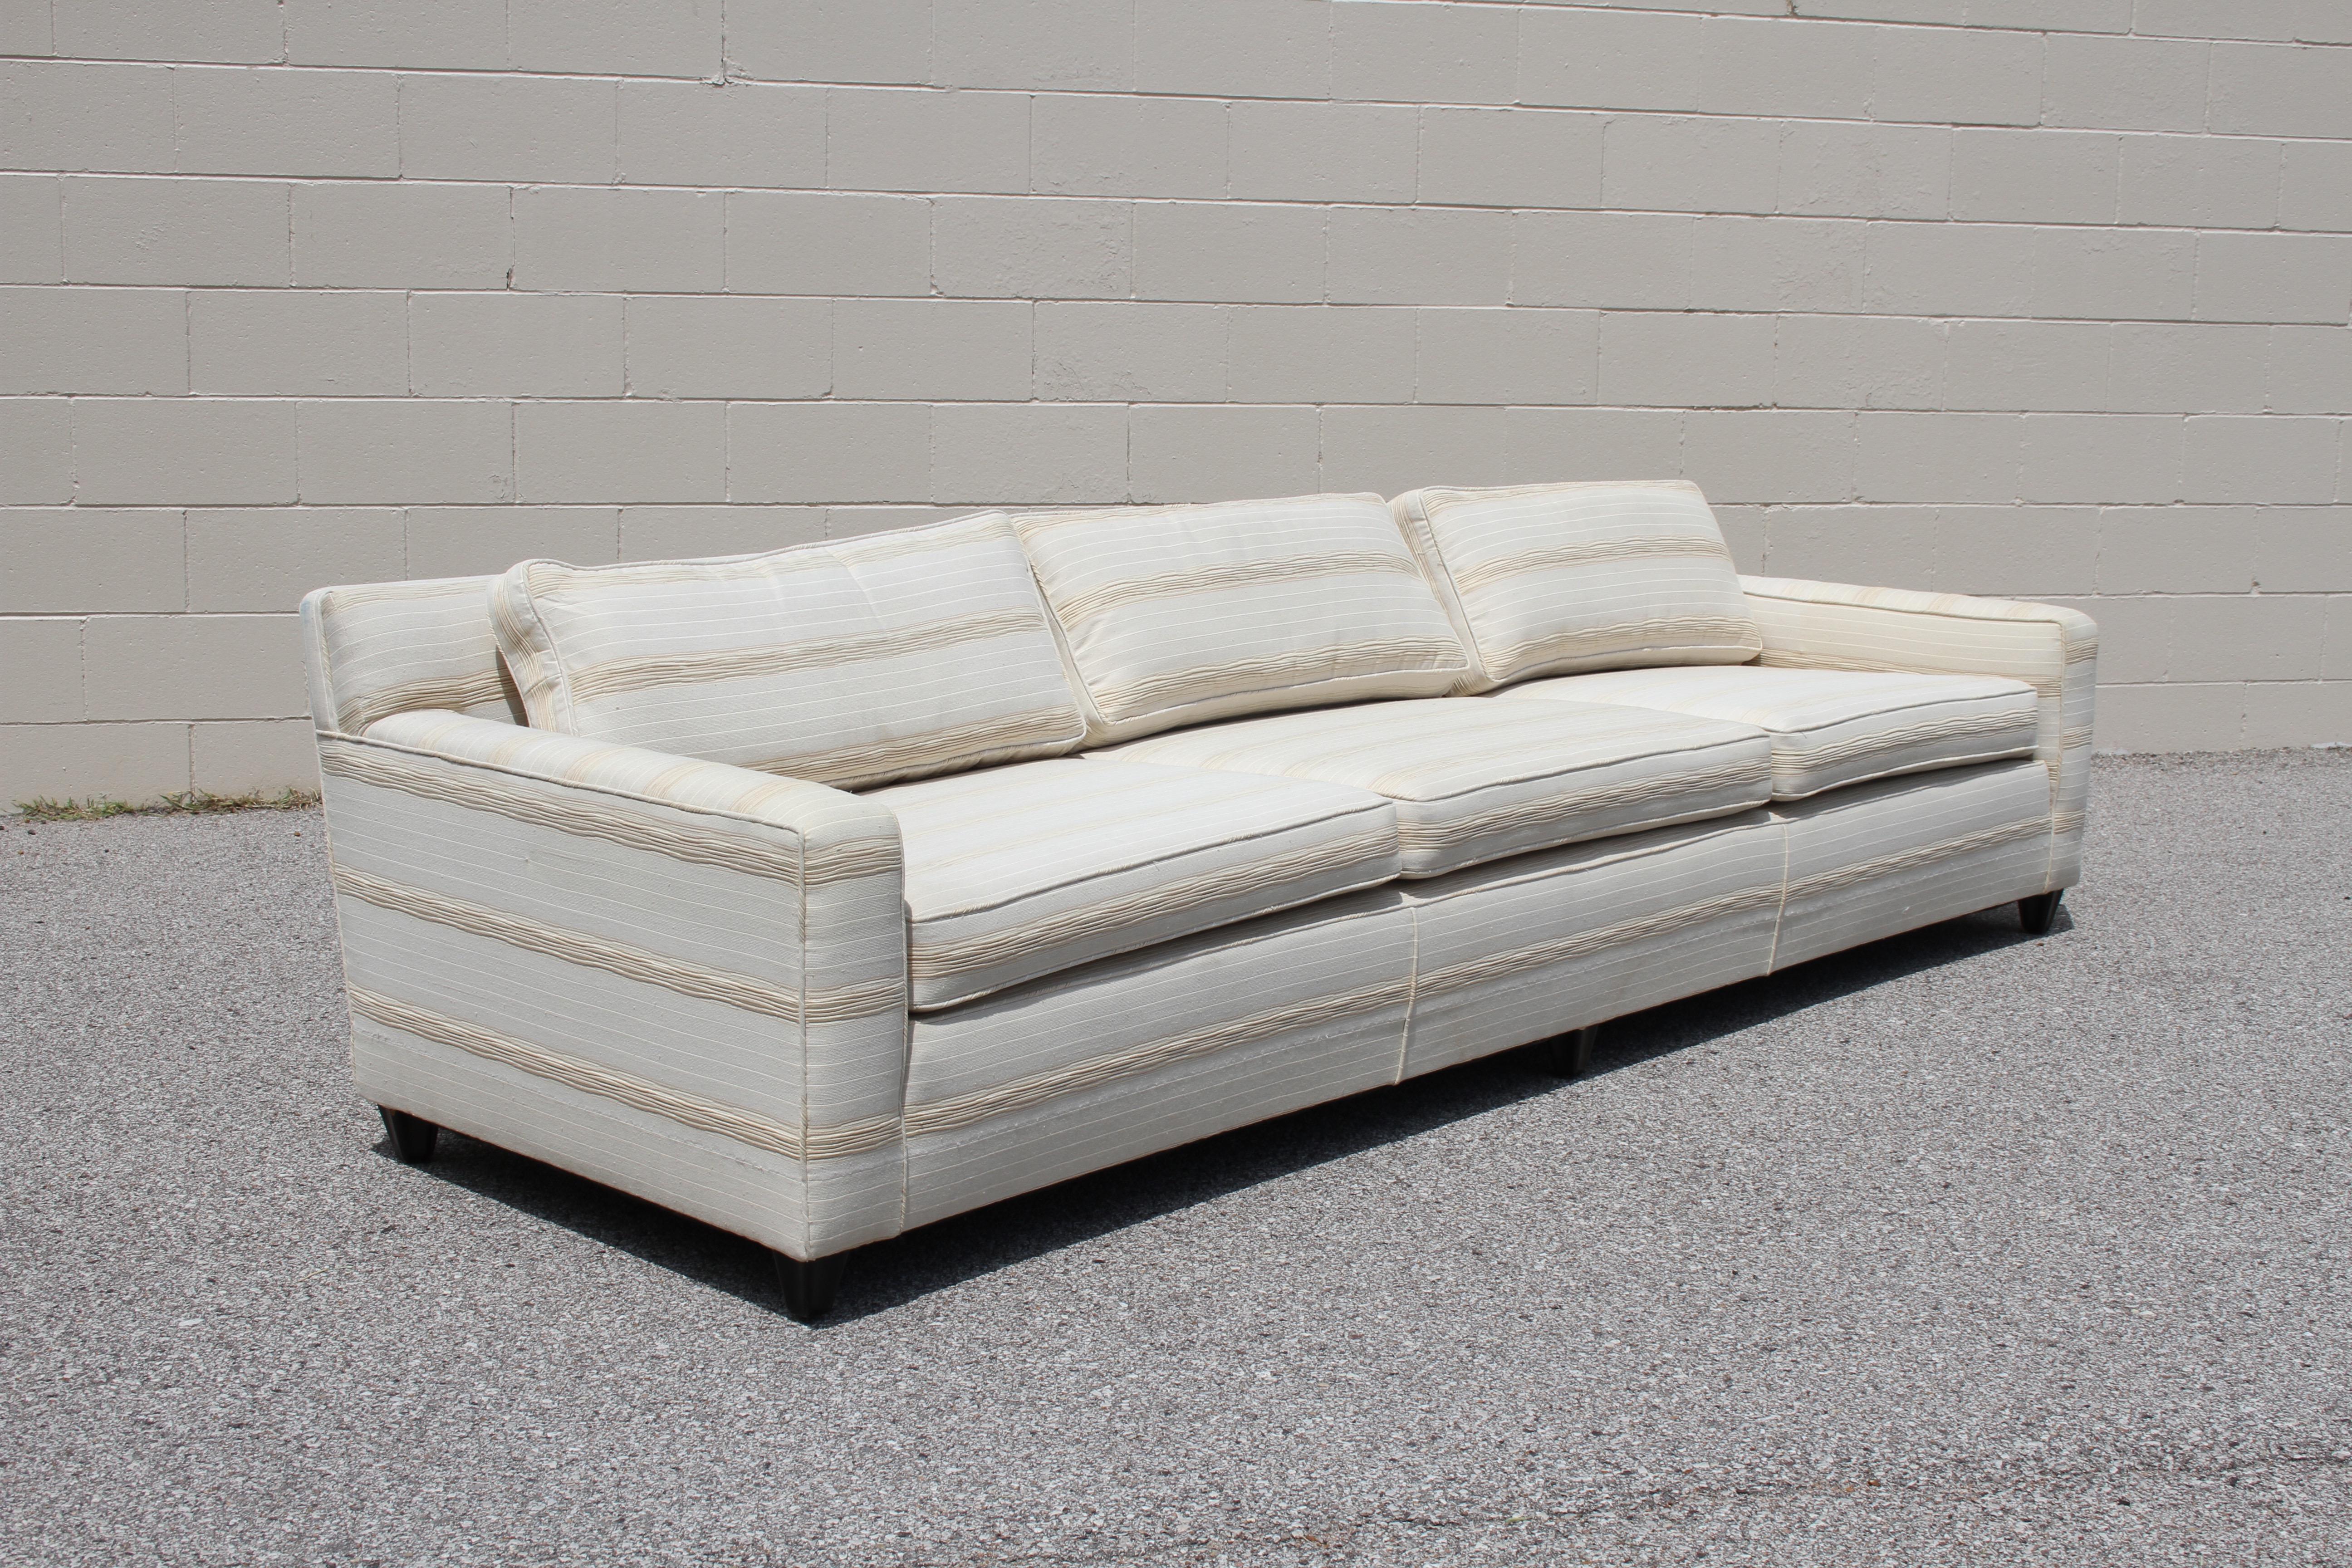 Edward Wormley for Dunbar 9' Tuxedo sofa, elegant yet modern, circa 1950s. Hard to beat the quality and craftsmanship of a Dunbar sofa. Fresh from a one owner estate, where most of the furniture was Dunbar. Reupholstered at some point, needs to be